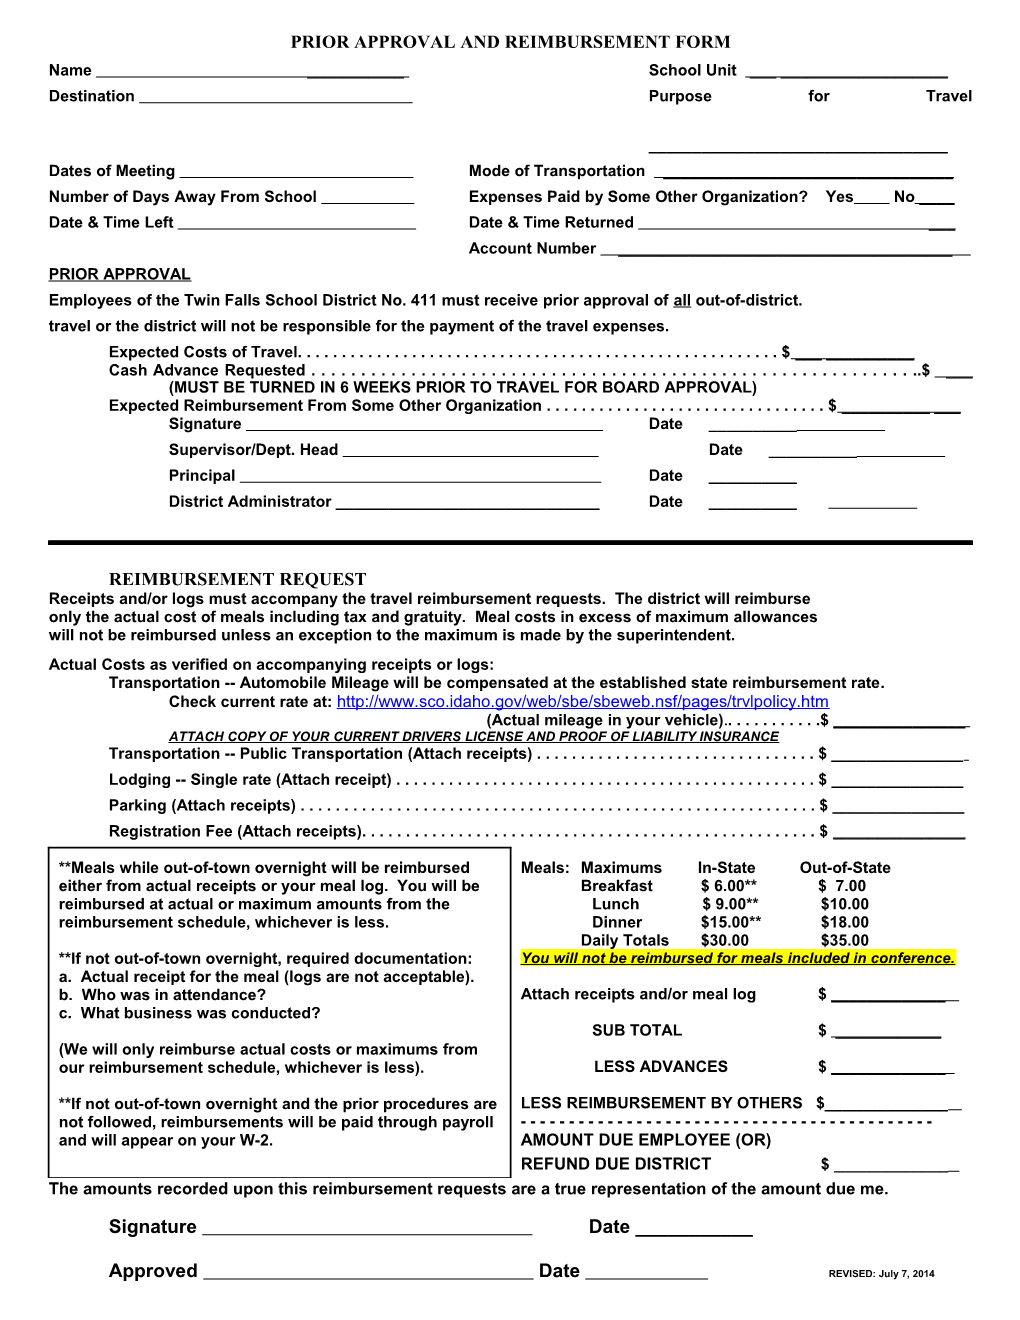 Prior Approval and Reimbursement Form